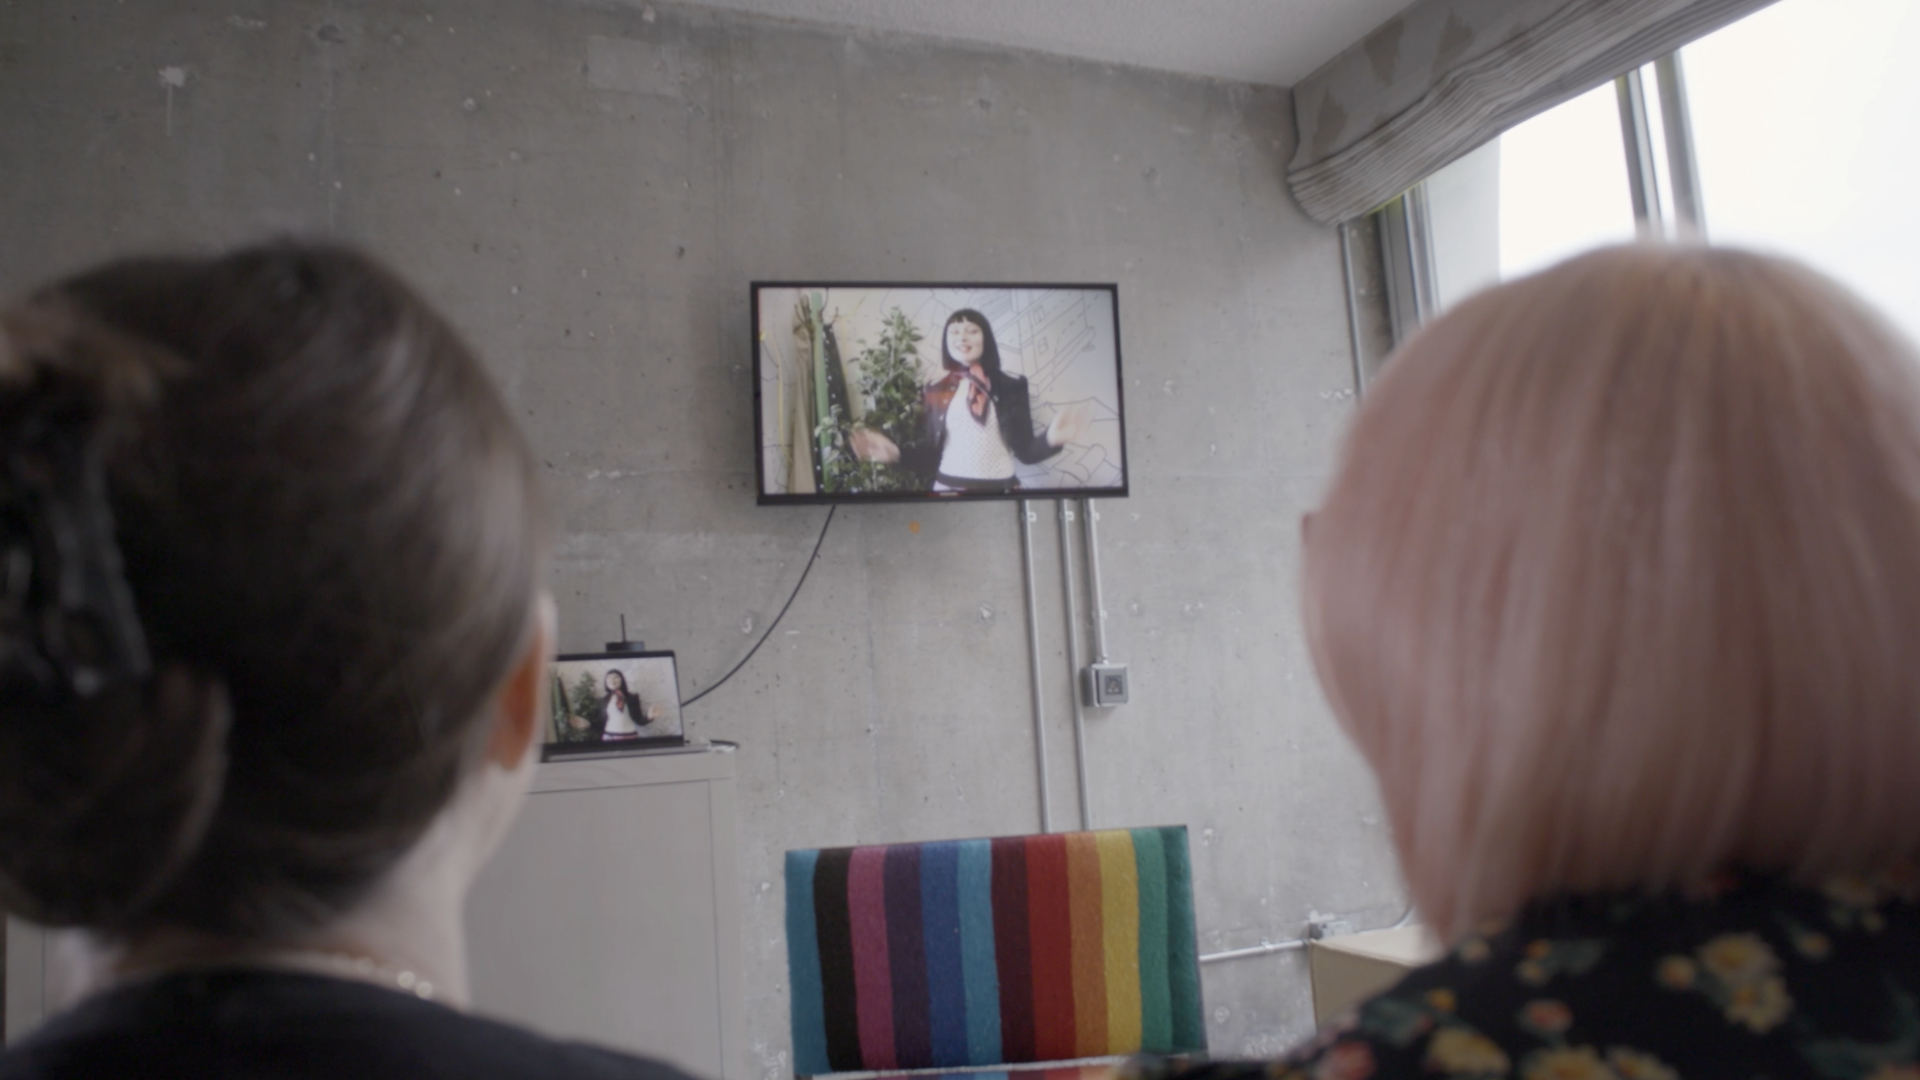 Two people watching a woman on a tv screen in a modern room.